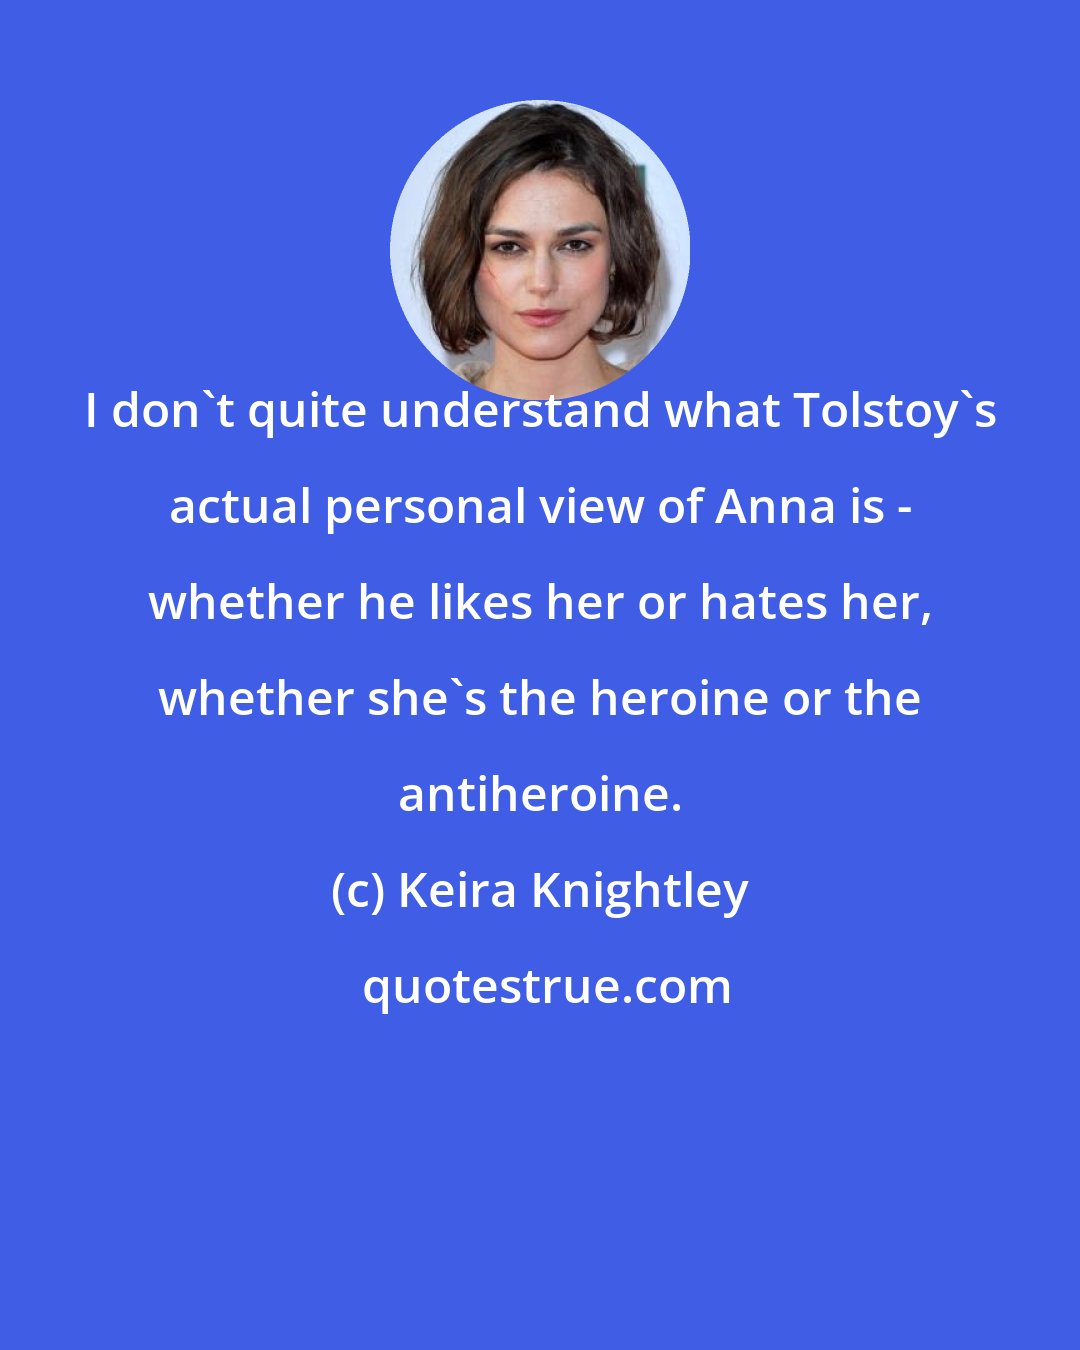 Keira Knightley: I don't quite understand what Tolstoy's actual personal view of Anna is - whether he likes her or hates her, whether she's the heroine or the antiheroine.